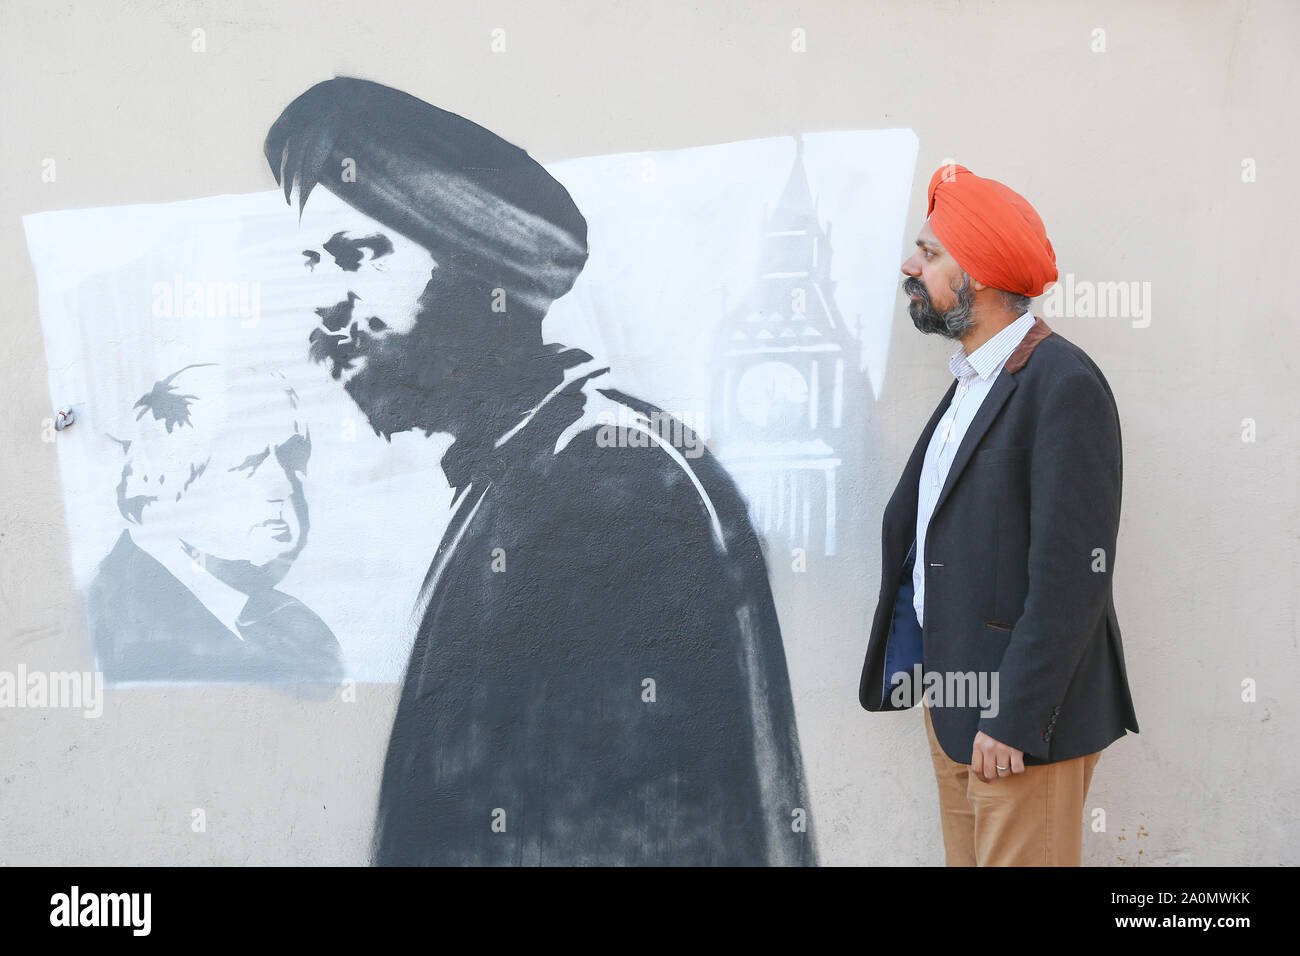 Tanmanjeet Singh Dhesi appears in a street graffiti mural, Soho Road, Handsworth, Birmingham, UK. The mural depicts the altercation Tan Dhesi had with PM Boris Johnson Sept 2019 in the House of Commons Stock Photo